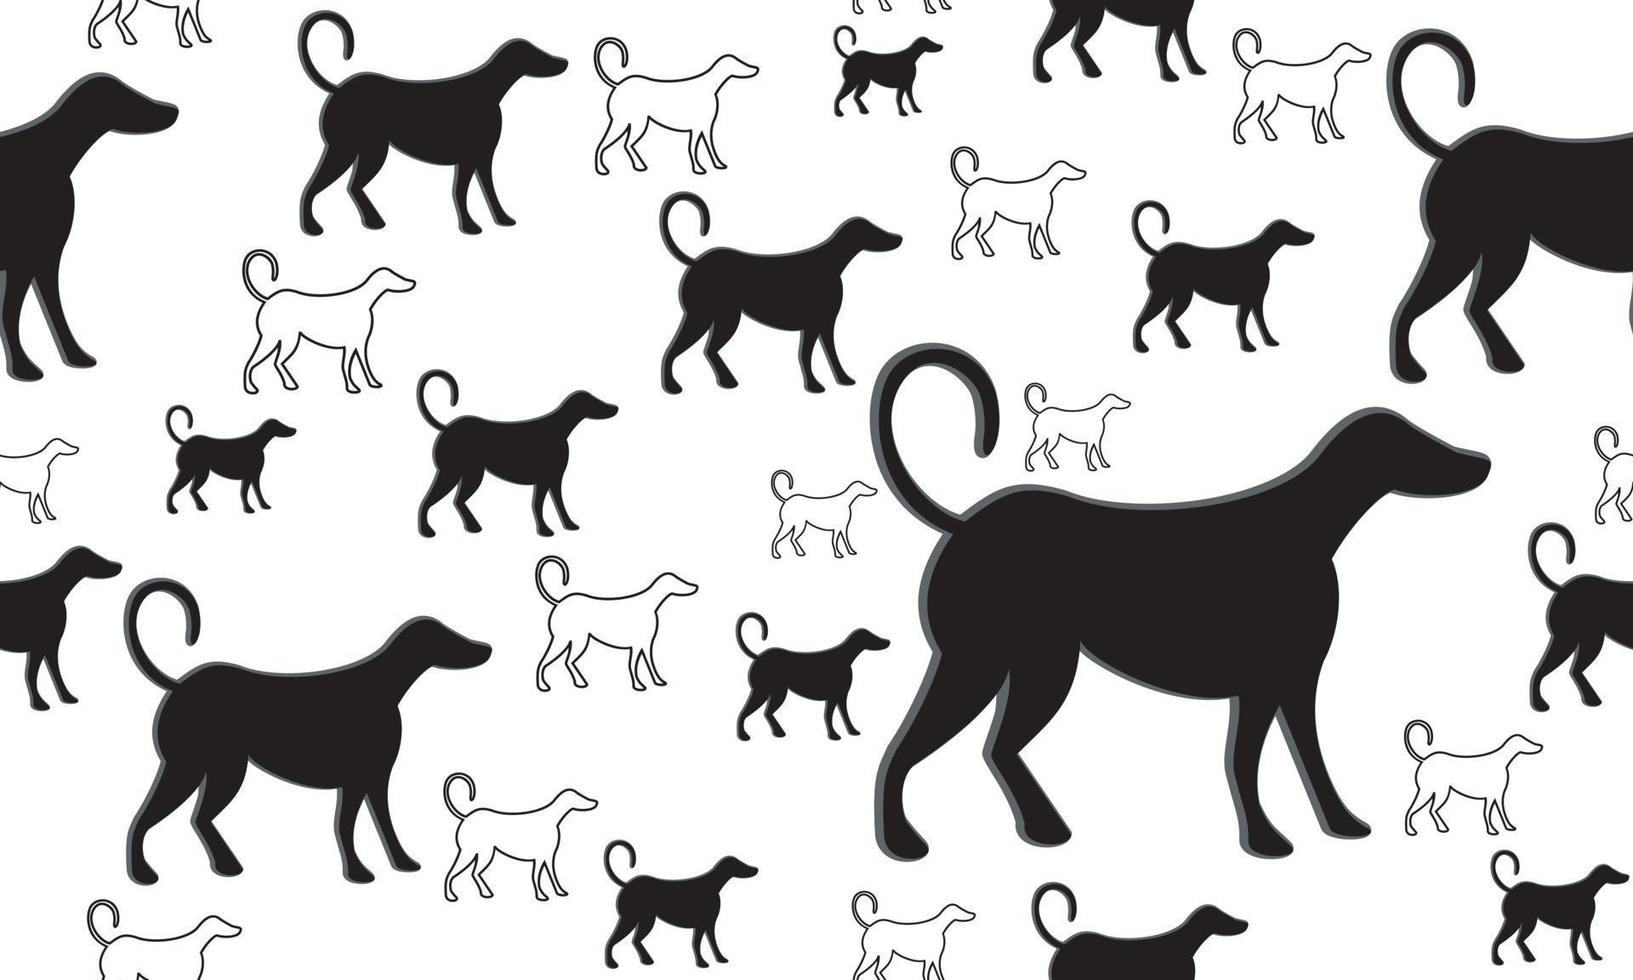 Seamless pattern with dog silhouettes on white background for decoration, wrapping paper, textile, website background, book cover, packaging. vector